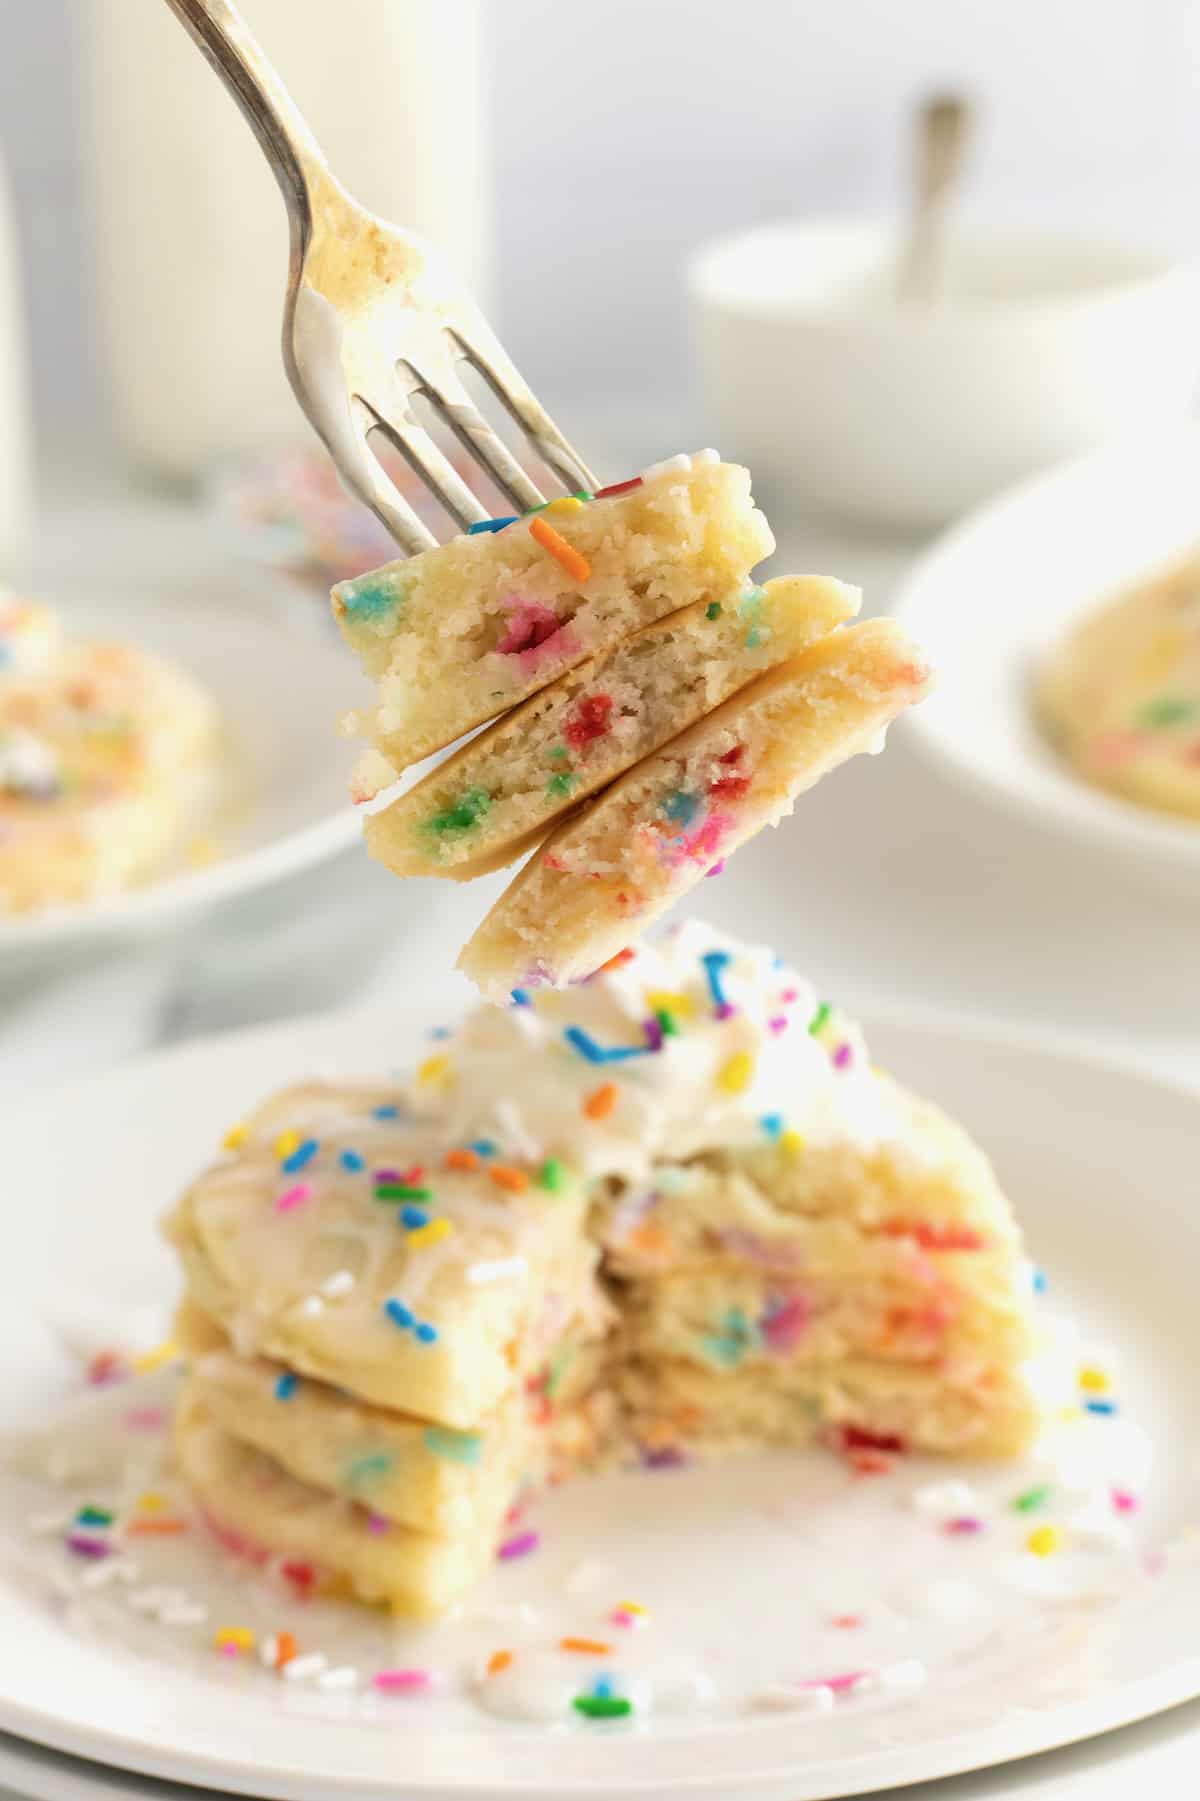 Fluffy pancakes with colorful confetti sprinkles, topped with whipped cream and more sprinkles.